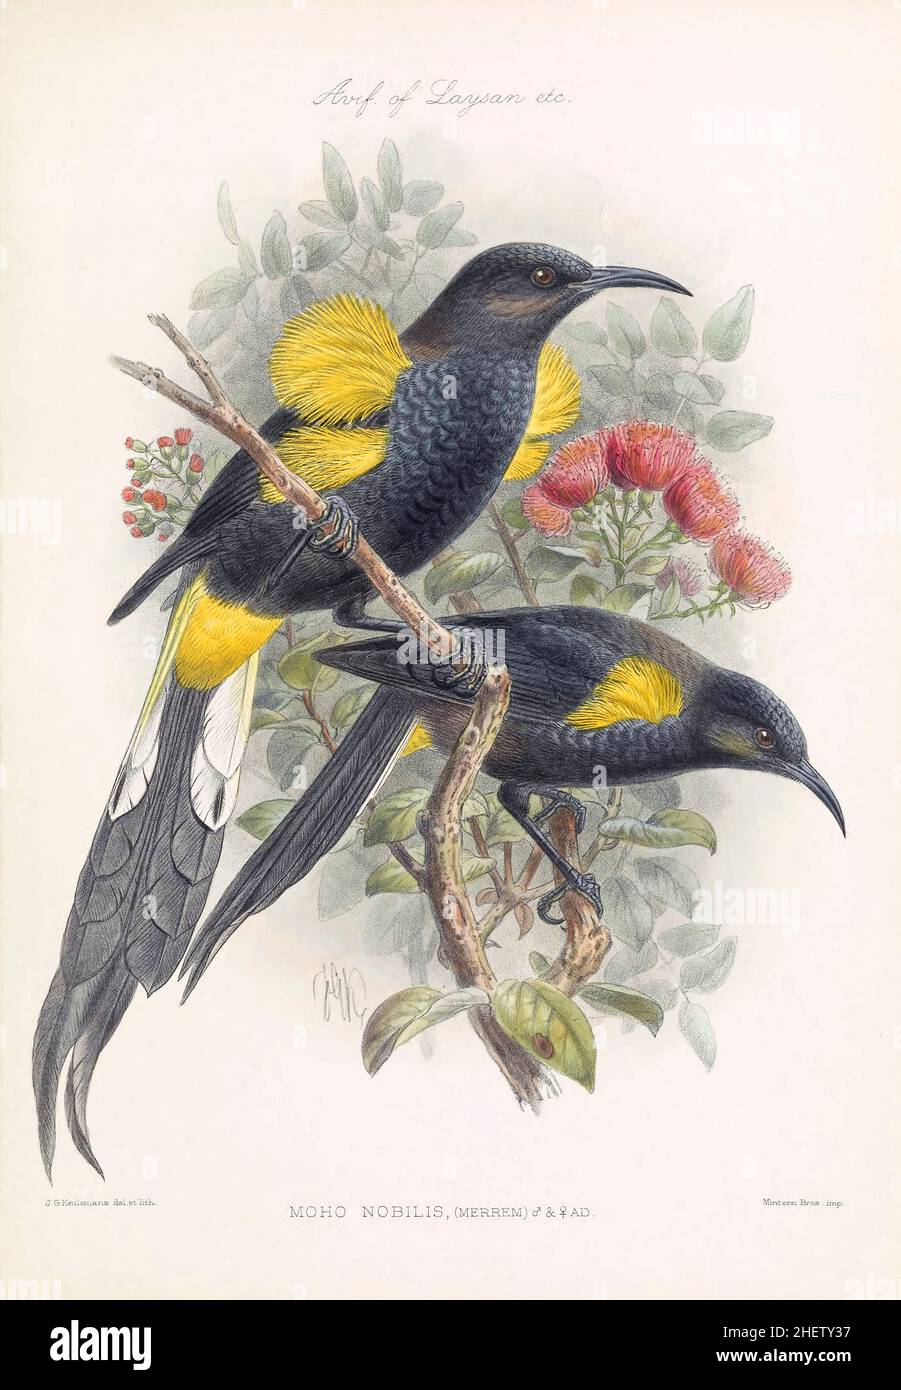 Moho Nobilis (male and female adult) or Hawaiʻi ʻōʻō once common on the Big Island but driven to extinction by the collection of its plumage for private collections, mosquito-borne diseases and deforestation of its natural habitat. Photograph of coloured plate from an illustrated book on the birds of the Hawaiian Islands published in 1893. Stock Photo